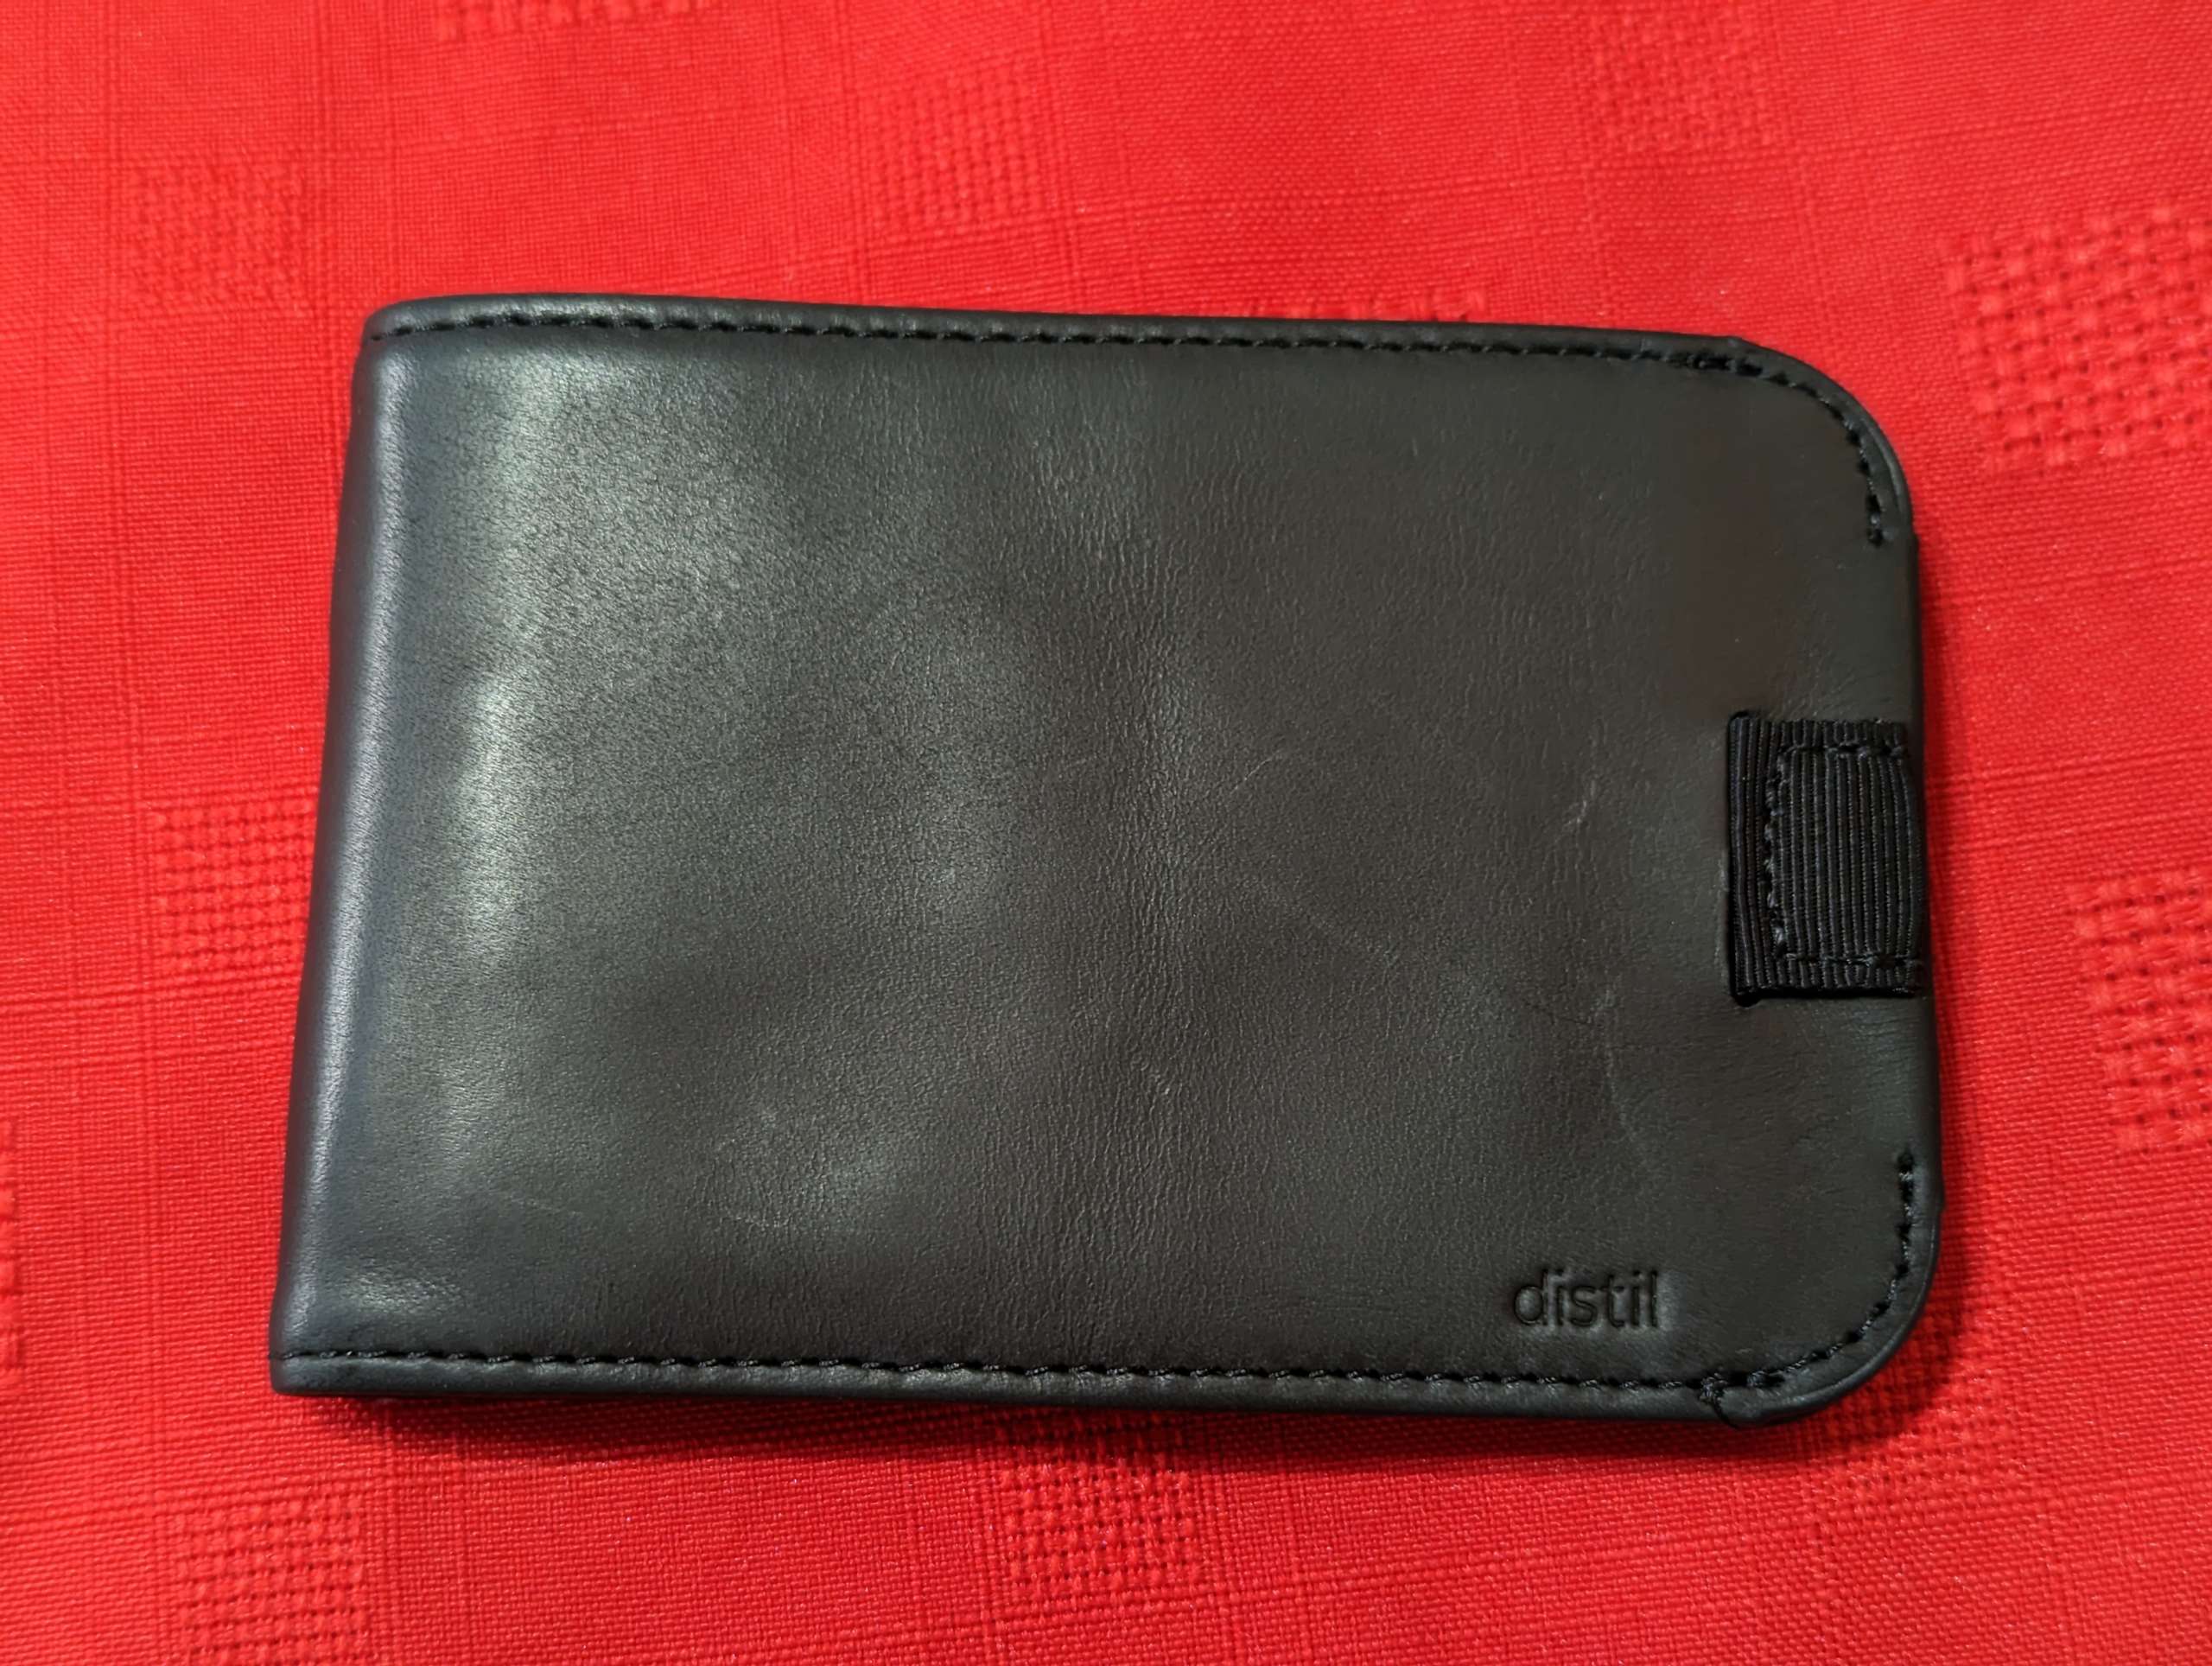 Distil Union Wally Bifold 5.0 slim wallet review - The Gadgeteer